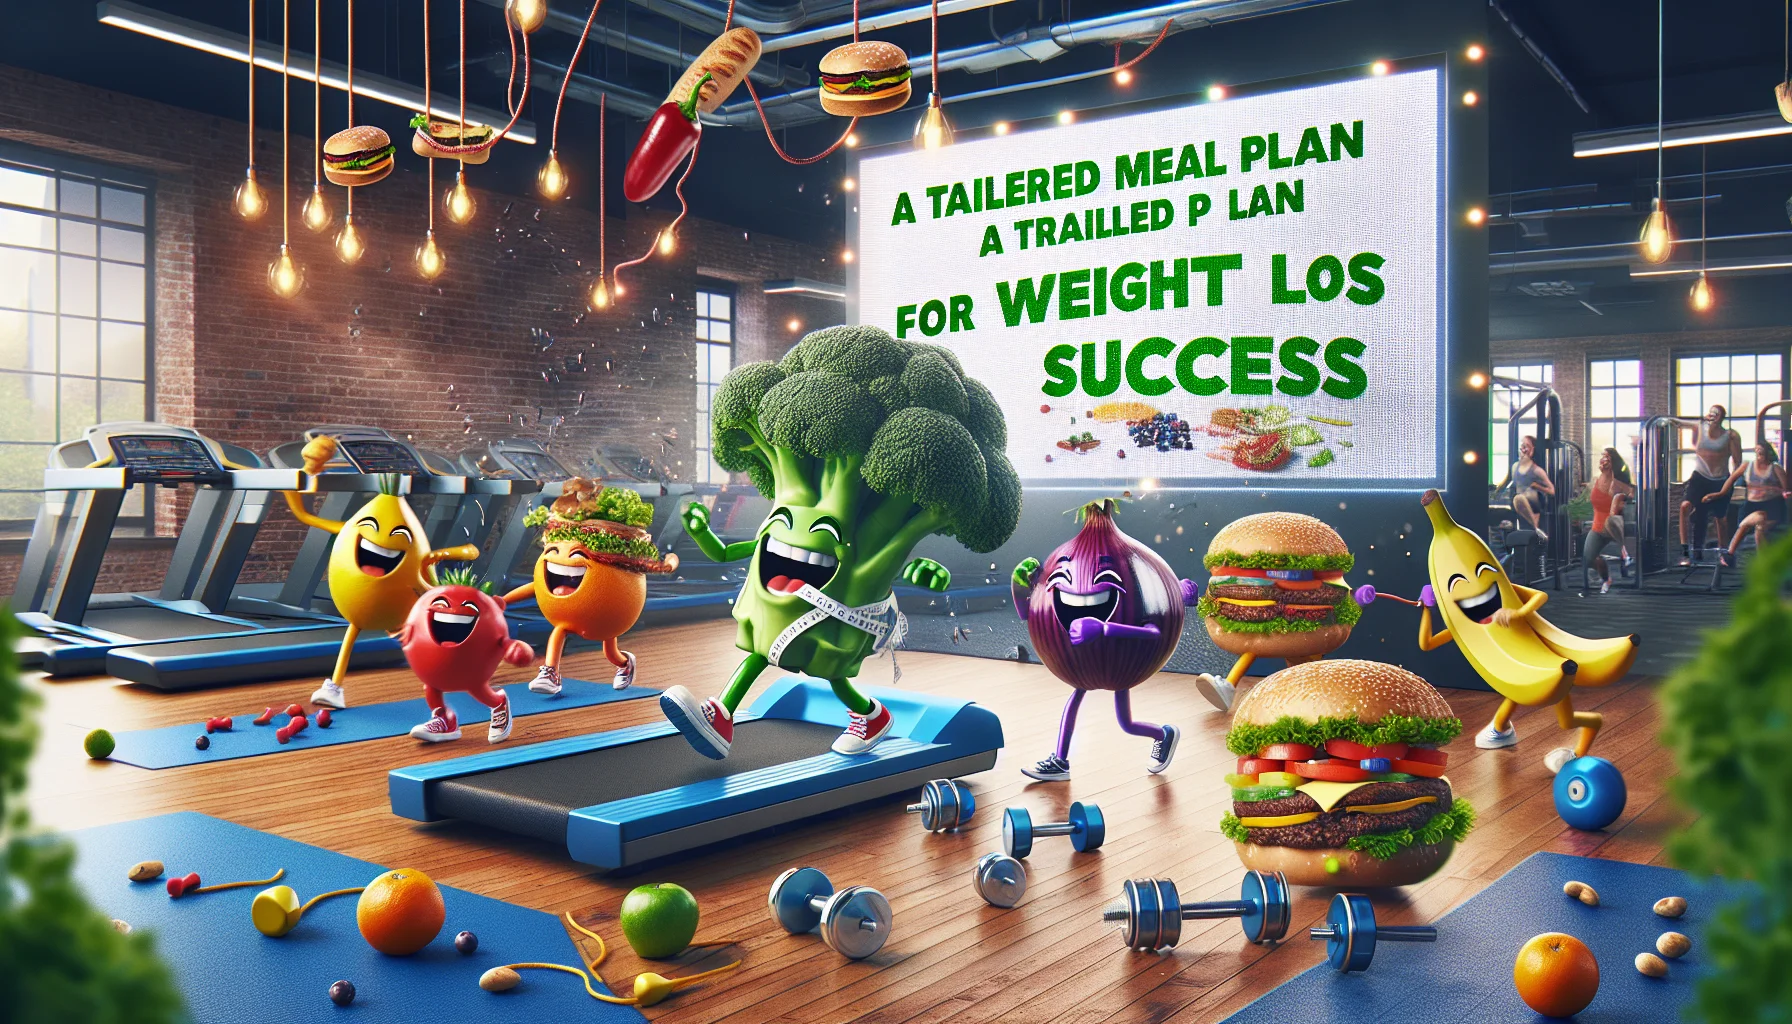 Showcase an interesting and amusing scenario in which a tailored meal plan for weight loss success is being promoted. The scene might include a laughing broccoli lifting dumbbells, a salad dressing dodging a burger attack, fruits playing skipping ropes, and a flock of energy-packed whole grains running on a treadmill. The scenario should be highly engaging, inspiring people to incorporate regular exercise into their routines. The setting can be inside a lively gym or outdoors in a vibrant park.